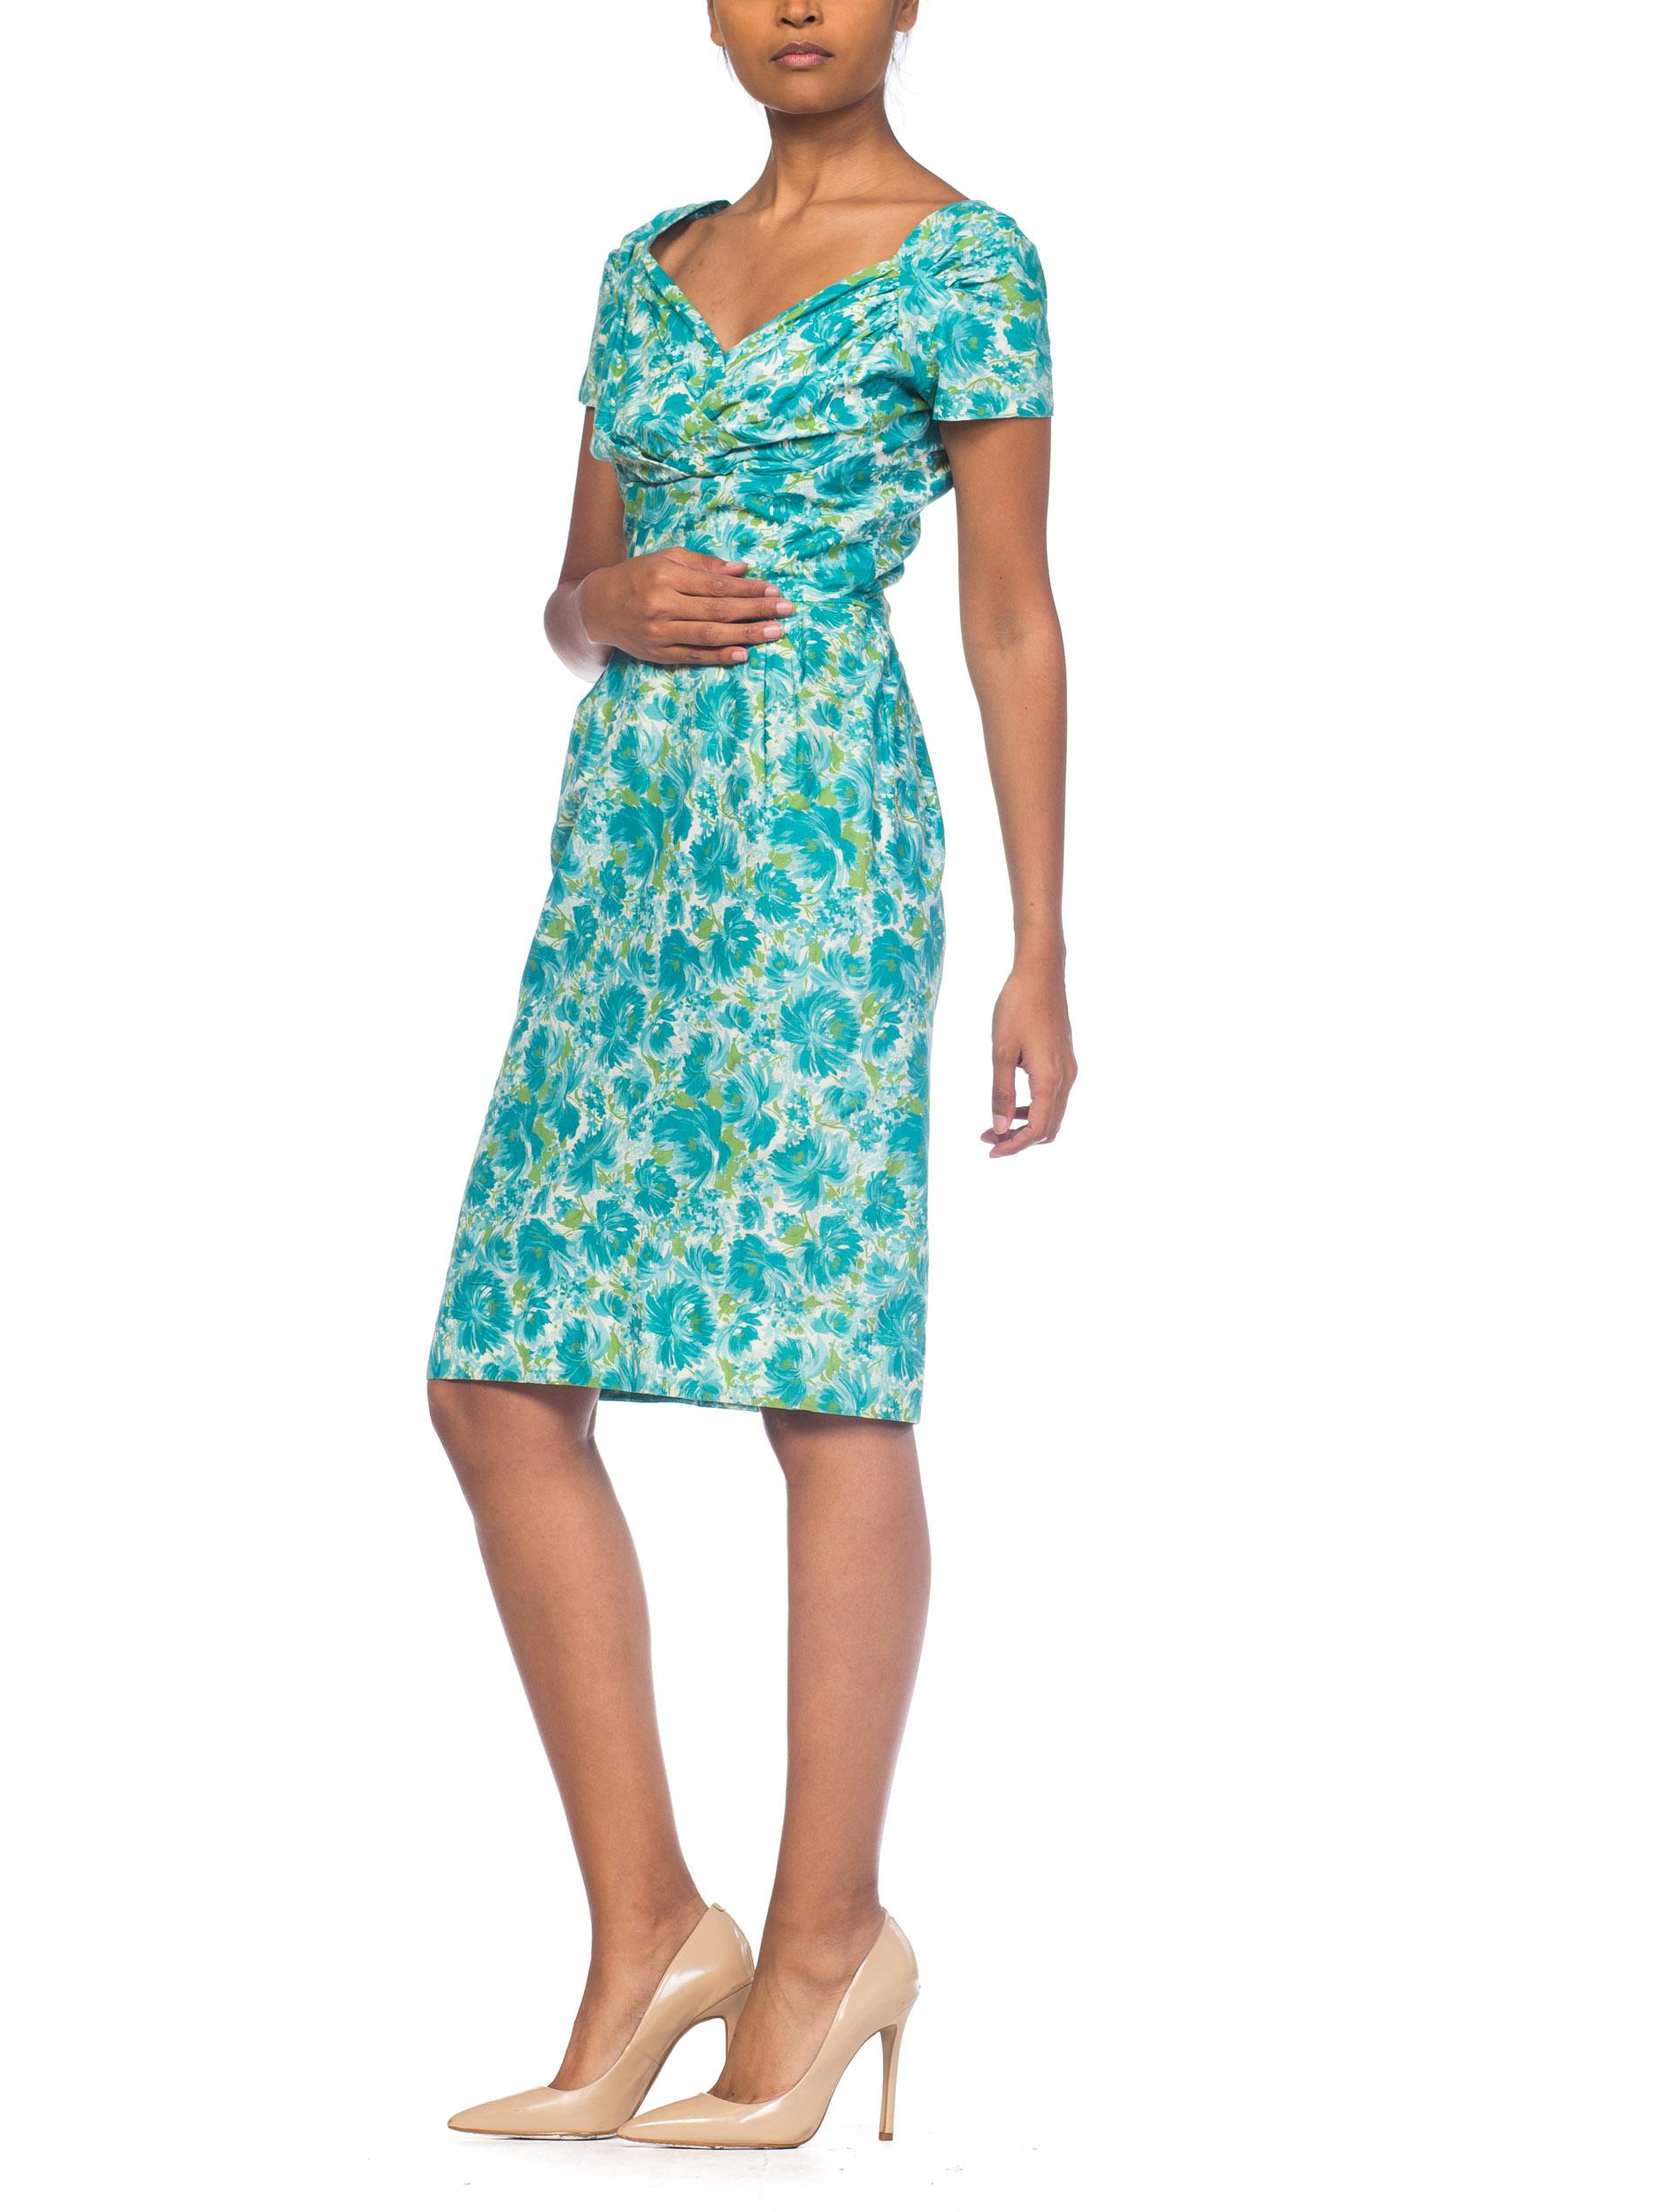 1950S Blue & Green Floral Cotton Dress With Draped Vava-Voom Neckline For Sale 5